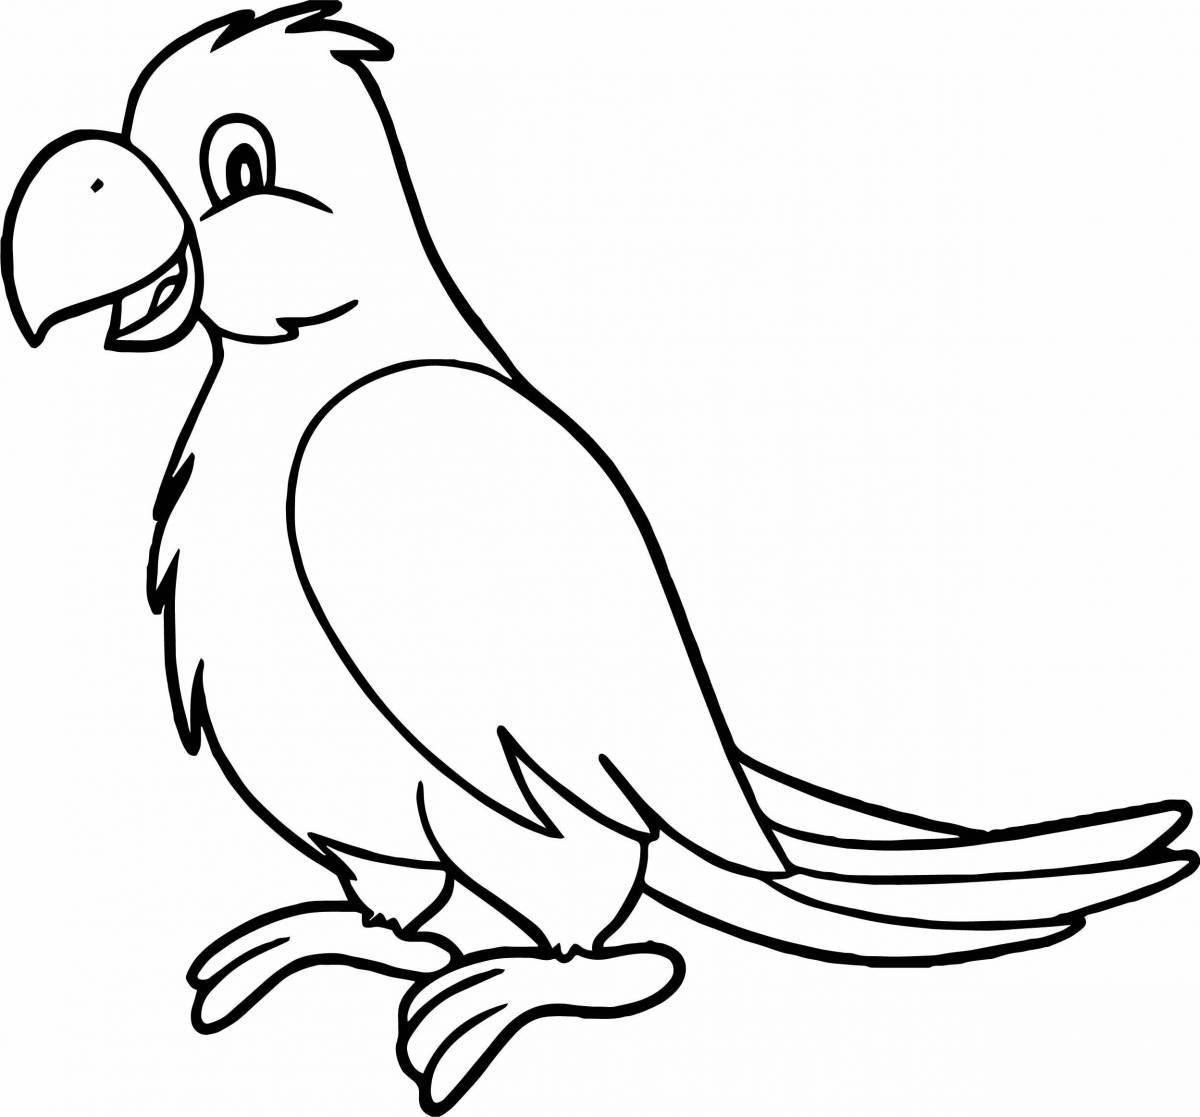 Great drawing of a parrot for kids